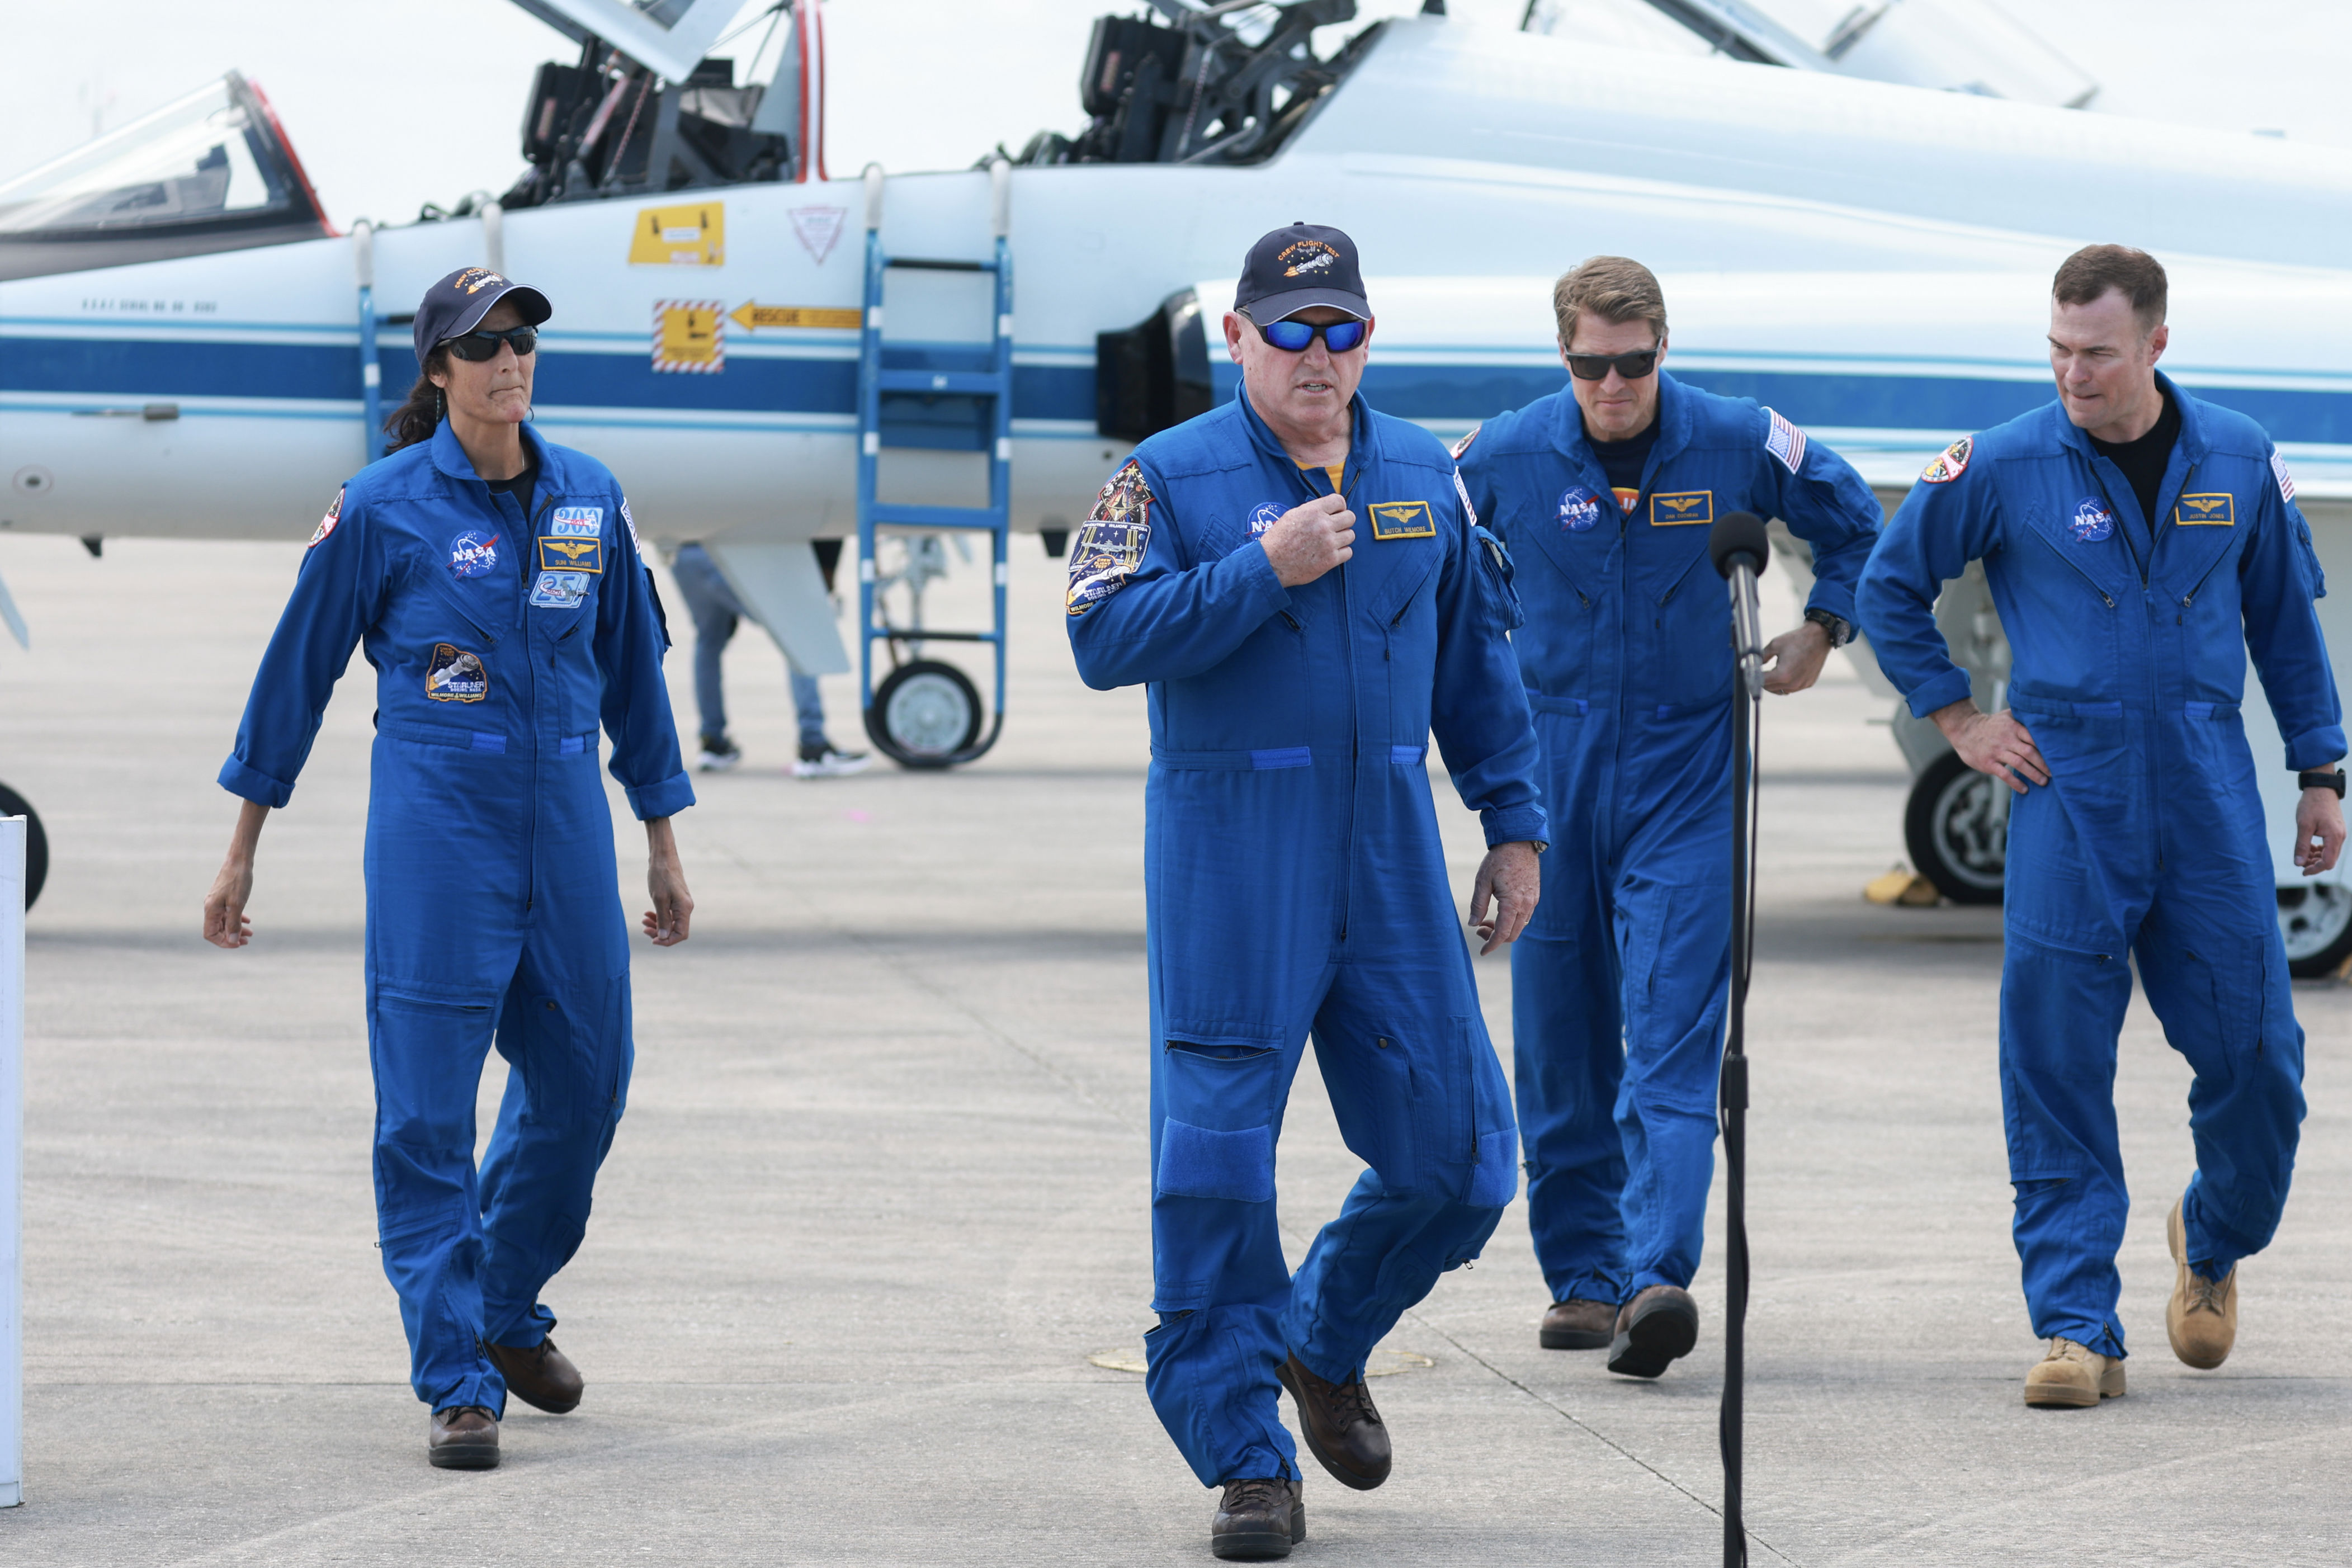 <p>NASA's Boeing Crew Flight Test Commander Butch Wilmore and Pilot Suni Williams prepared to address the media after arriving at the Kennedy Space Center in Cape Canaveral, Florida, in a T-38 jet on April 25, 2024. </p><p>They flew in for a mission aboard the Boeing Starliner that will take them to the International Space Station. </p><p>That launch is set to depart from the Cape Canaveral Space Force Station on May 6, 2024.</p><p>MORE: <a href="https://www.wonderwall.com/celebrity/photos/spacex-falcon-9-successfully-launched-a-northrop-cygnus-cargo-spacecraft-to-the-international-space-station-833227.gallery">SpaceX Falcon 9 rocket cargo arrives at International Space Station: All the best launch pictures</a></p>